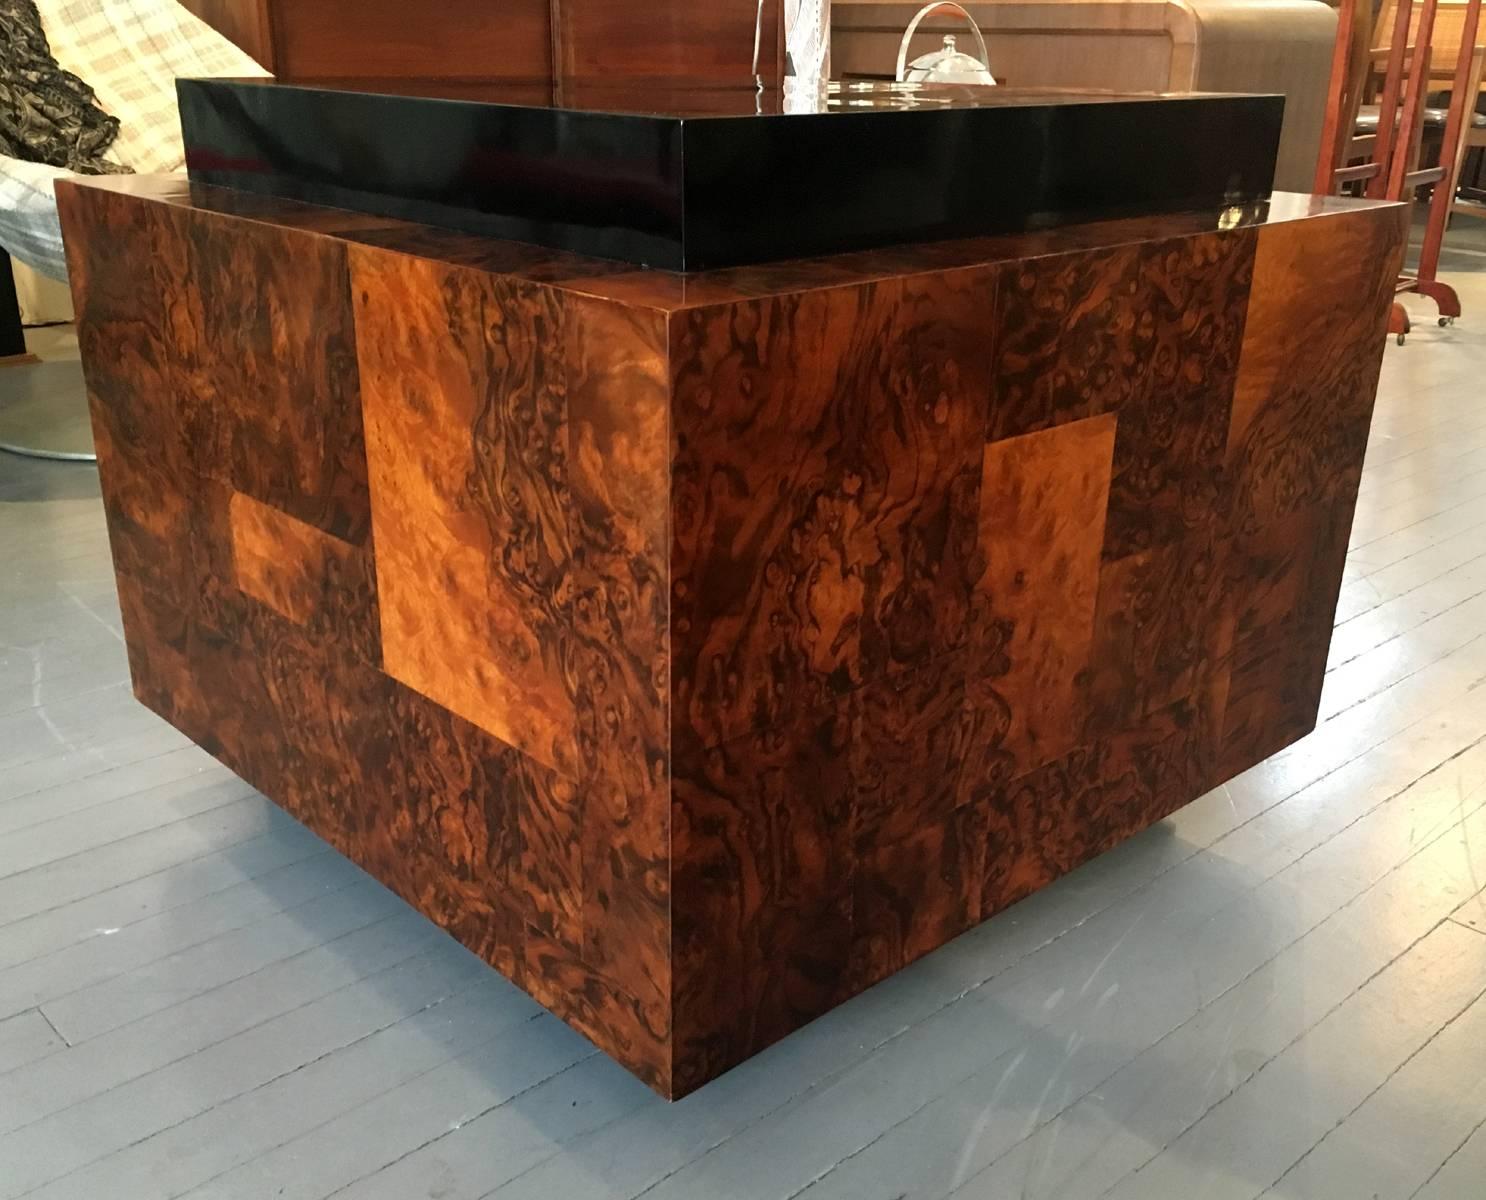 Fantastic cube cityscape side table by Paul Evans for Directional, circa 1970s. Made of patchwork of burl wood with dramatic grains, in contrast with high glossy black lacquered top and base. Labelled with a metal tag "an original Paul